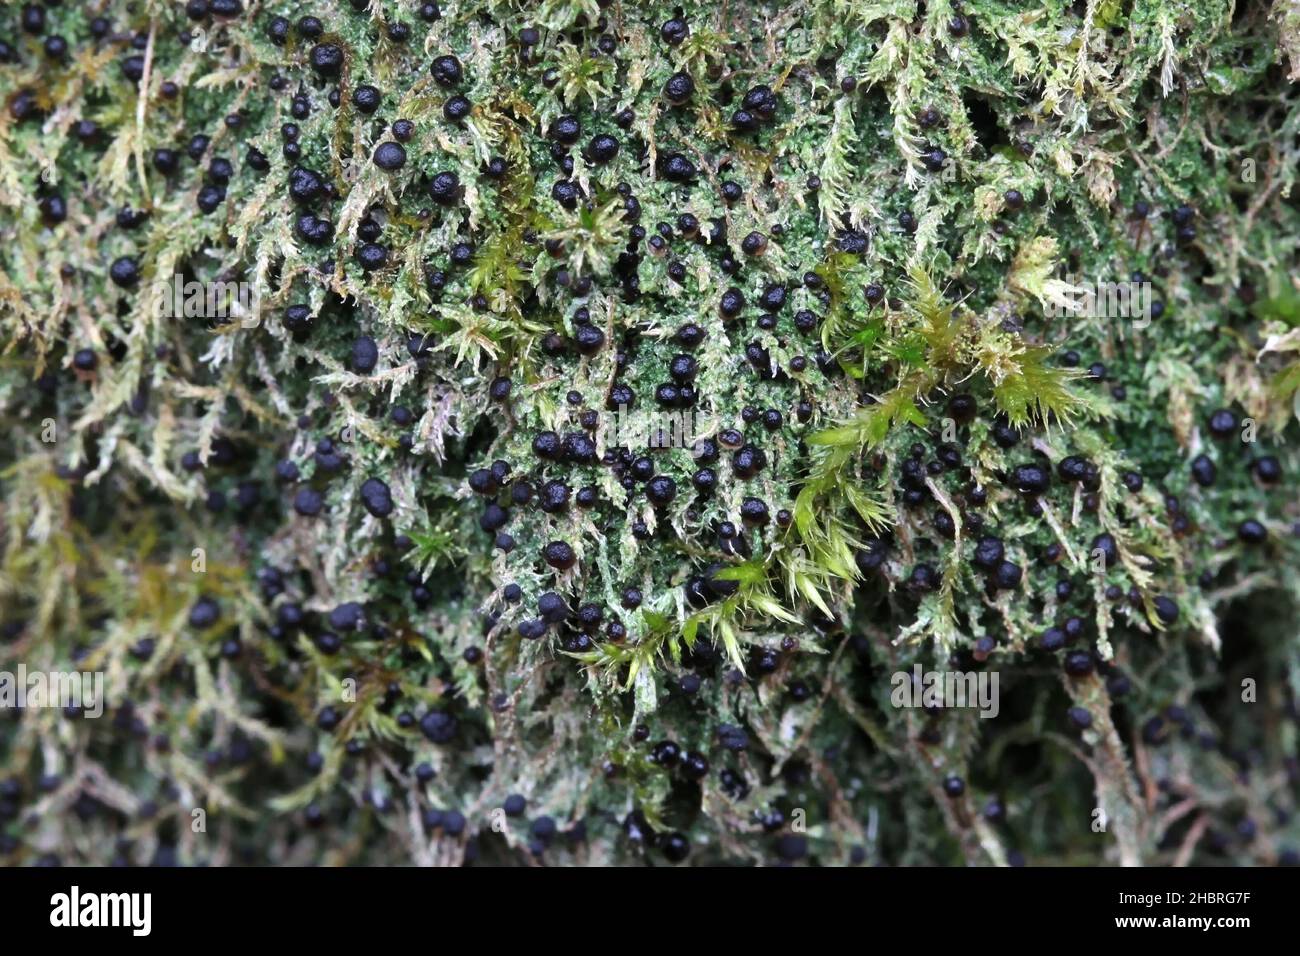 Mycobilimbia tetramera, also called Bacidia fusca, known as Four-celled Moss Dot, lichen from Finland Stock Photo